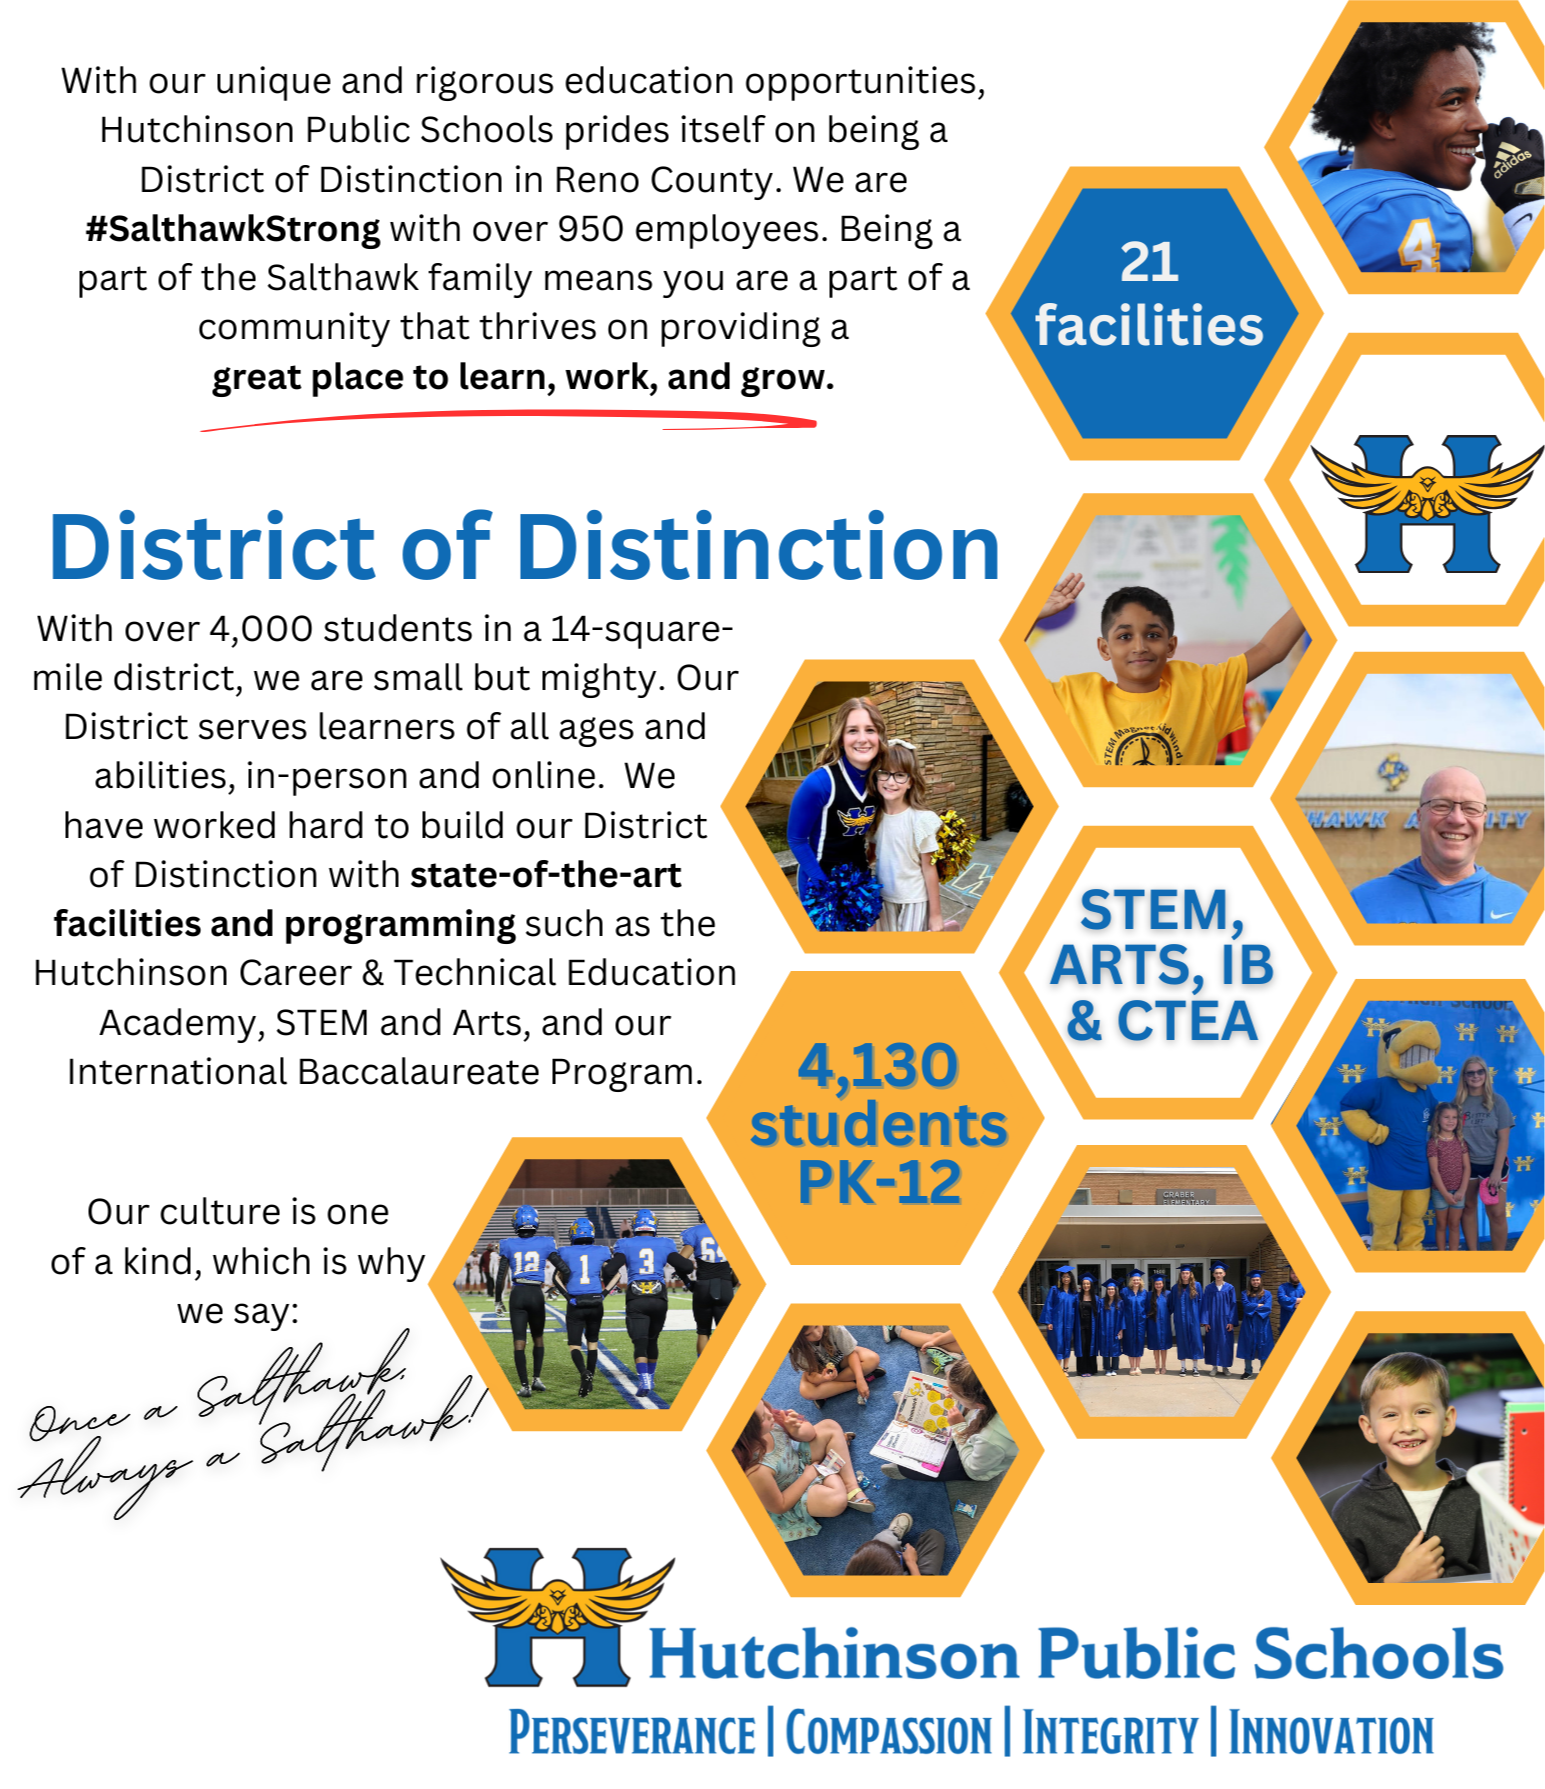  With our unique and rigorous education opportunities, Hutchinson Public Schools prides itself on being a District of Distinction in Reno County. We are #SalthawkStrong with over 950 employees. Being a part of the Salthawk family means you are a part of a community that thrives on providing a  great place to learn, work, and grow.  District of Distinction With over 4,000 students in a 14-square-mile district, we are small but mighty. Our District serves learners of all ages and abilities, in-person and online. We have worked hard to build our District of Distinction with state-of-the-art facilities and programming such as the Hutchinson Career & Technical Education Academy, STEM and Arts, and our International Baccalaureate Program.   Our culture is one of a kind, which is why we say: Once a Salthawk, always a Salthawk. Hutchinson Public Schools Perseverance, compassion, integrity, innovation. Honeycomb with logo and student pictures and words: 21 facilities, stem, arts, IB, & CTEA, 4130 students PK-12